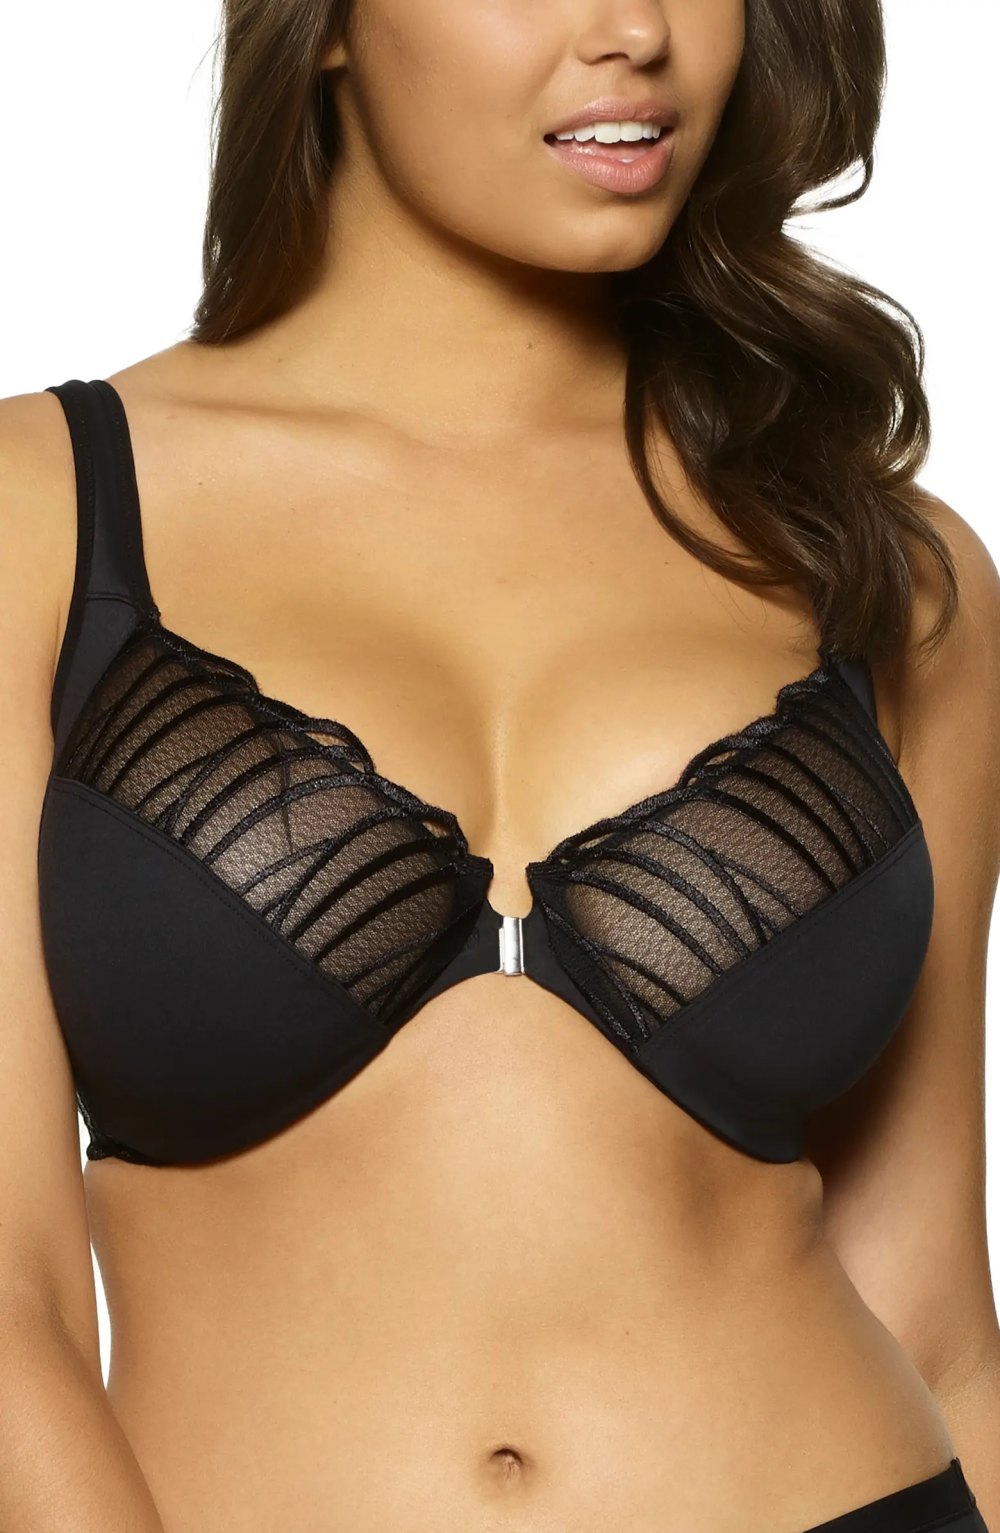 Full Cup minimizer bras For Large Busts C H G Cup – Okay Trendy